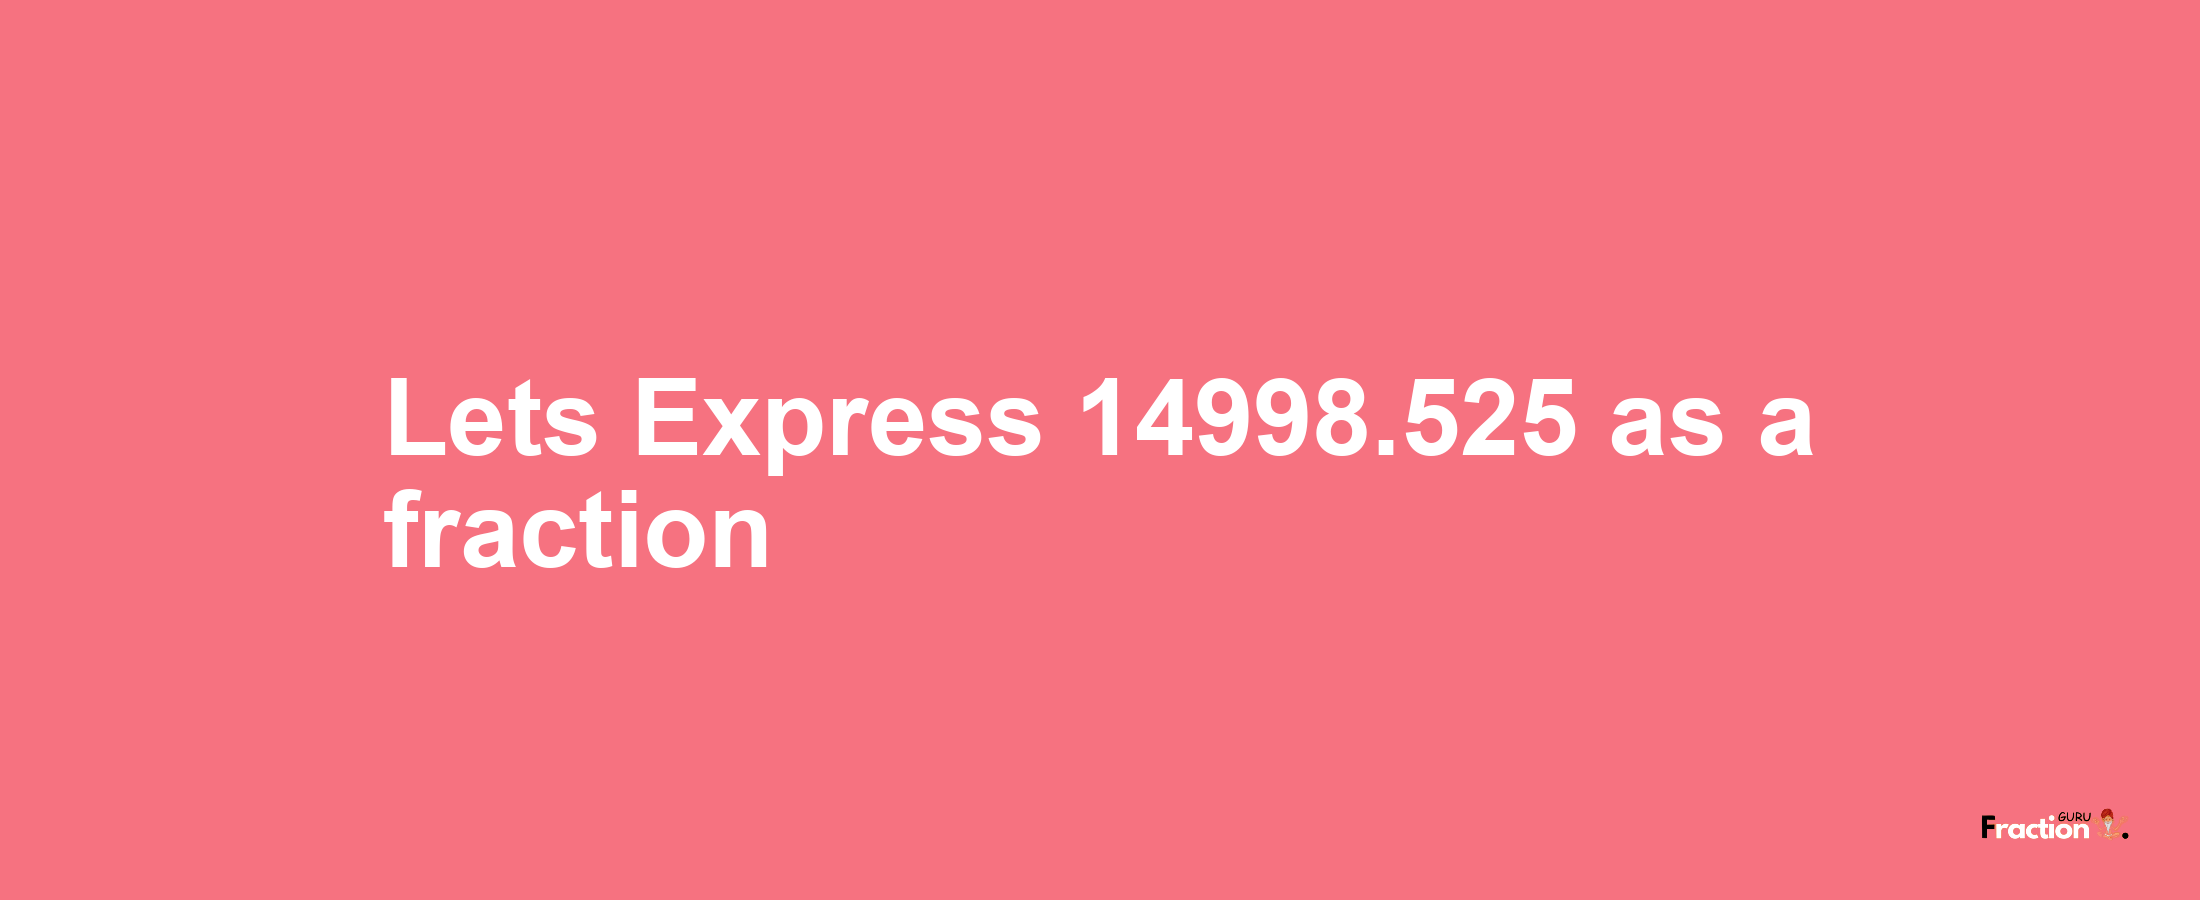 Lets Express 14998.525 as afraction